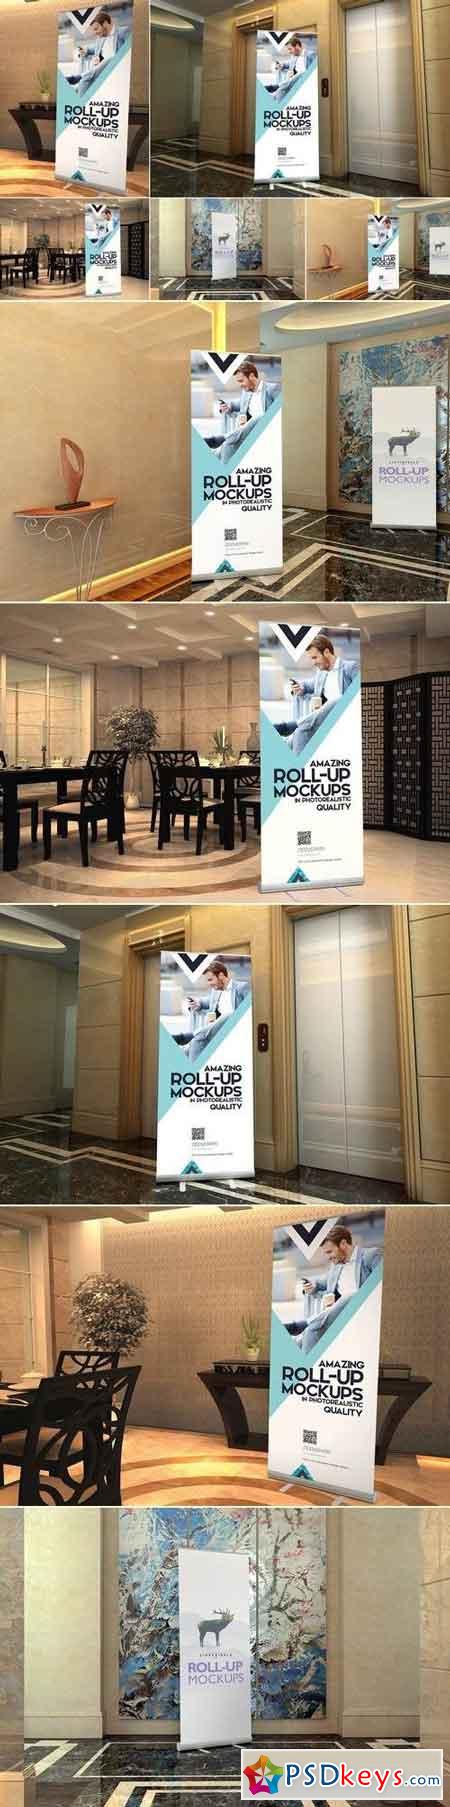 Roll-up Banner Mockup PSD